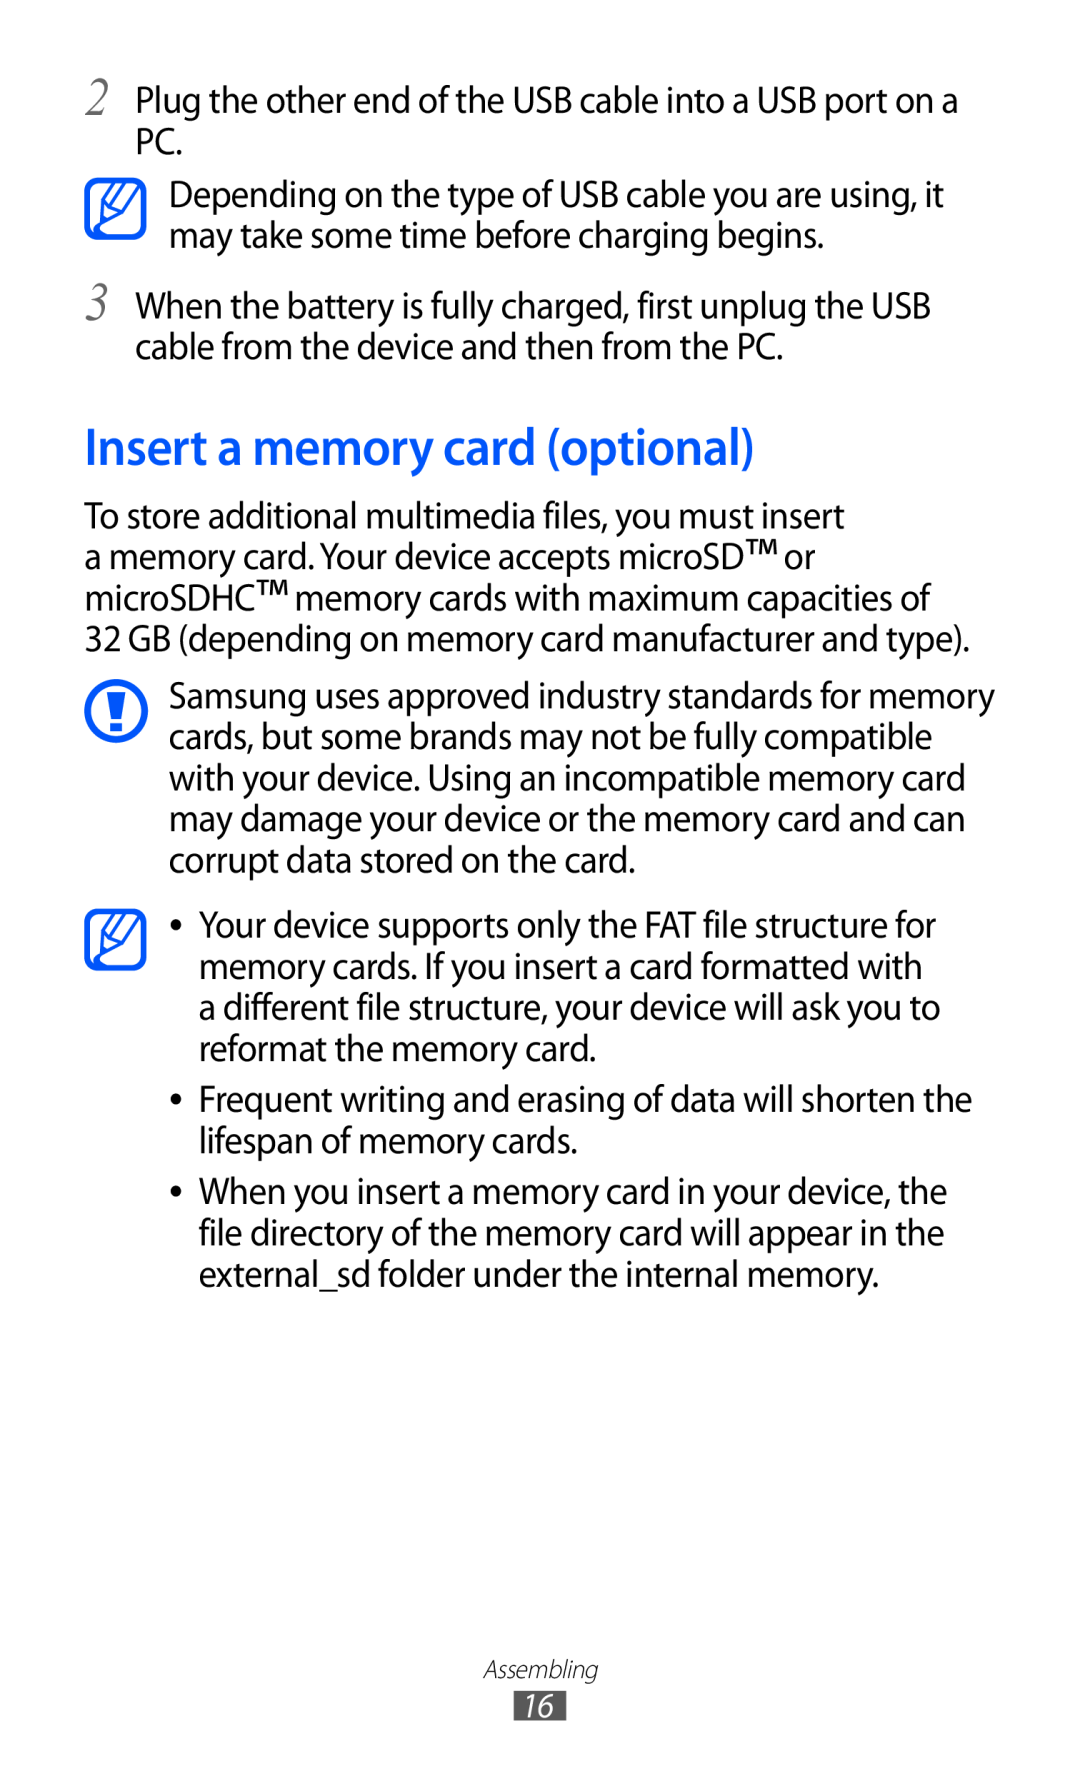 Samsung GT-I9070HKAJED manual Insert a memory card optional, Plug the other end of the USB cable into a USB port on a PC 